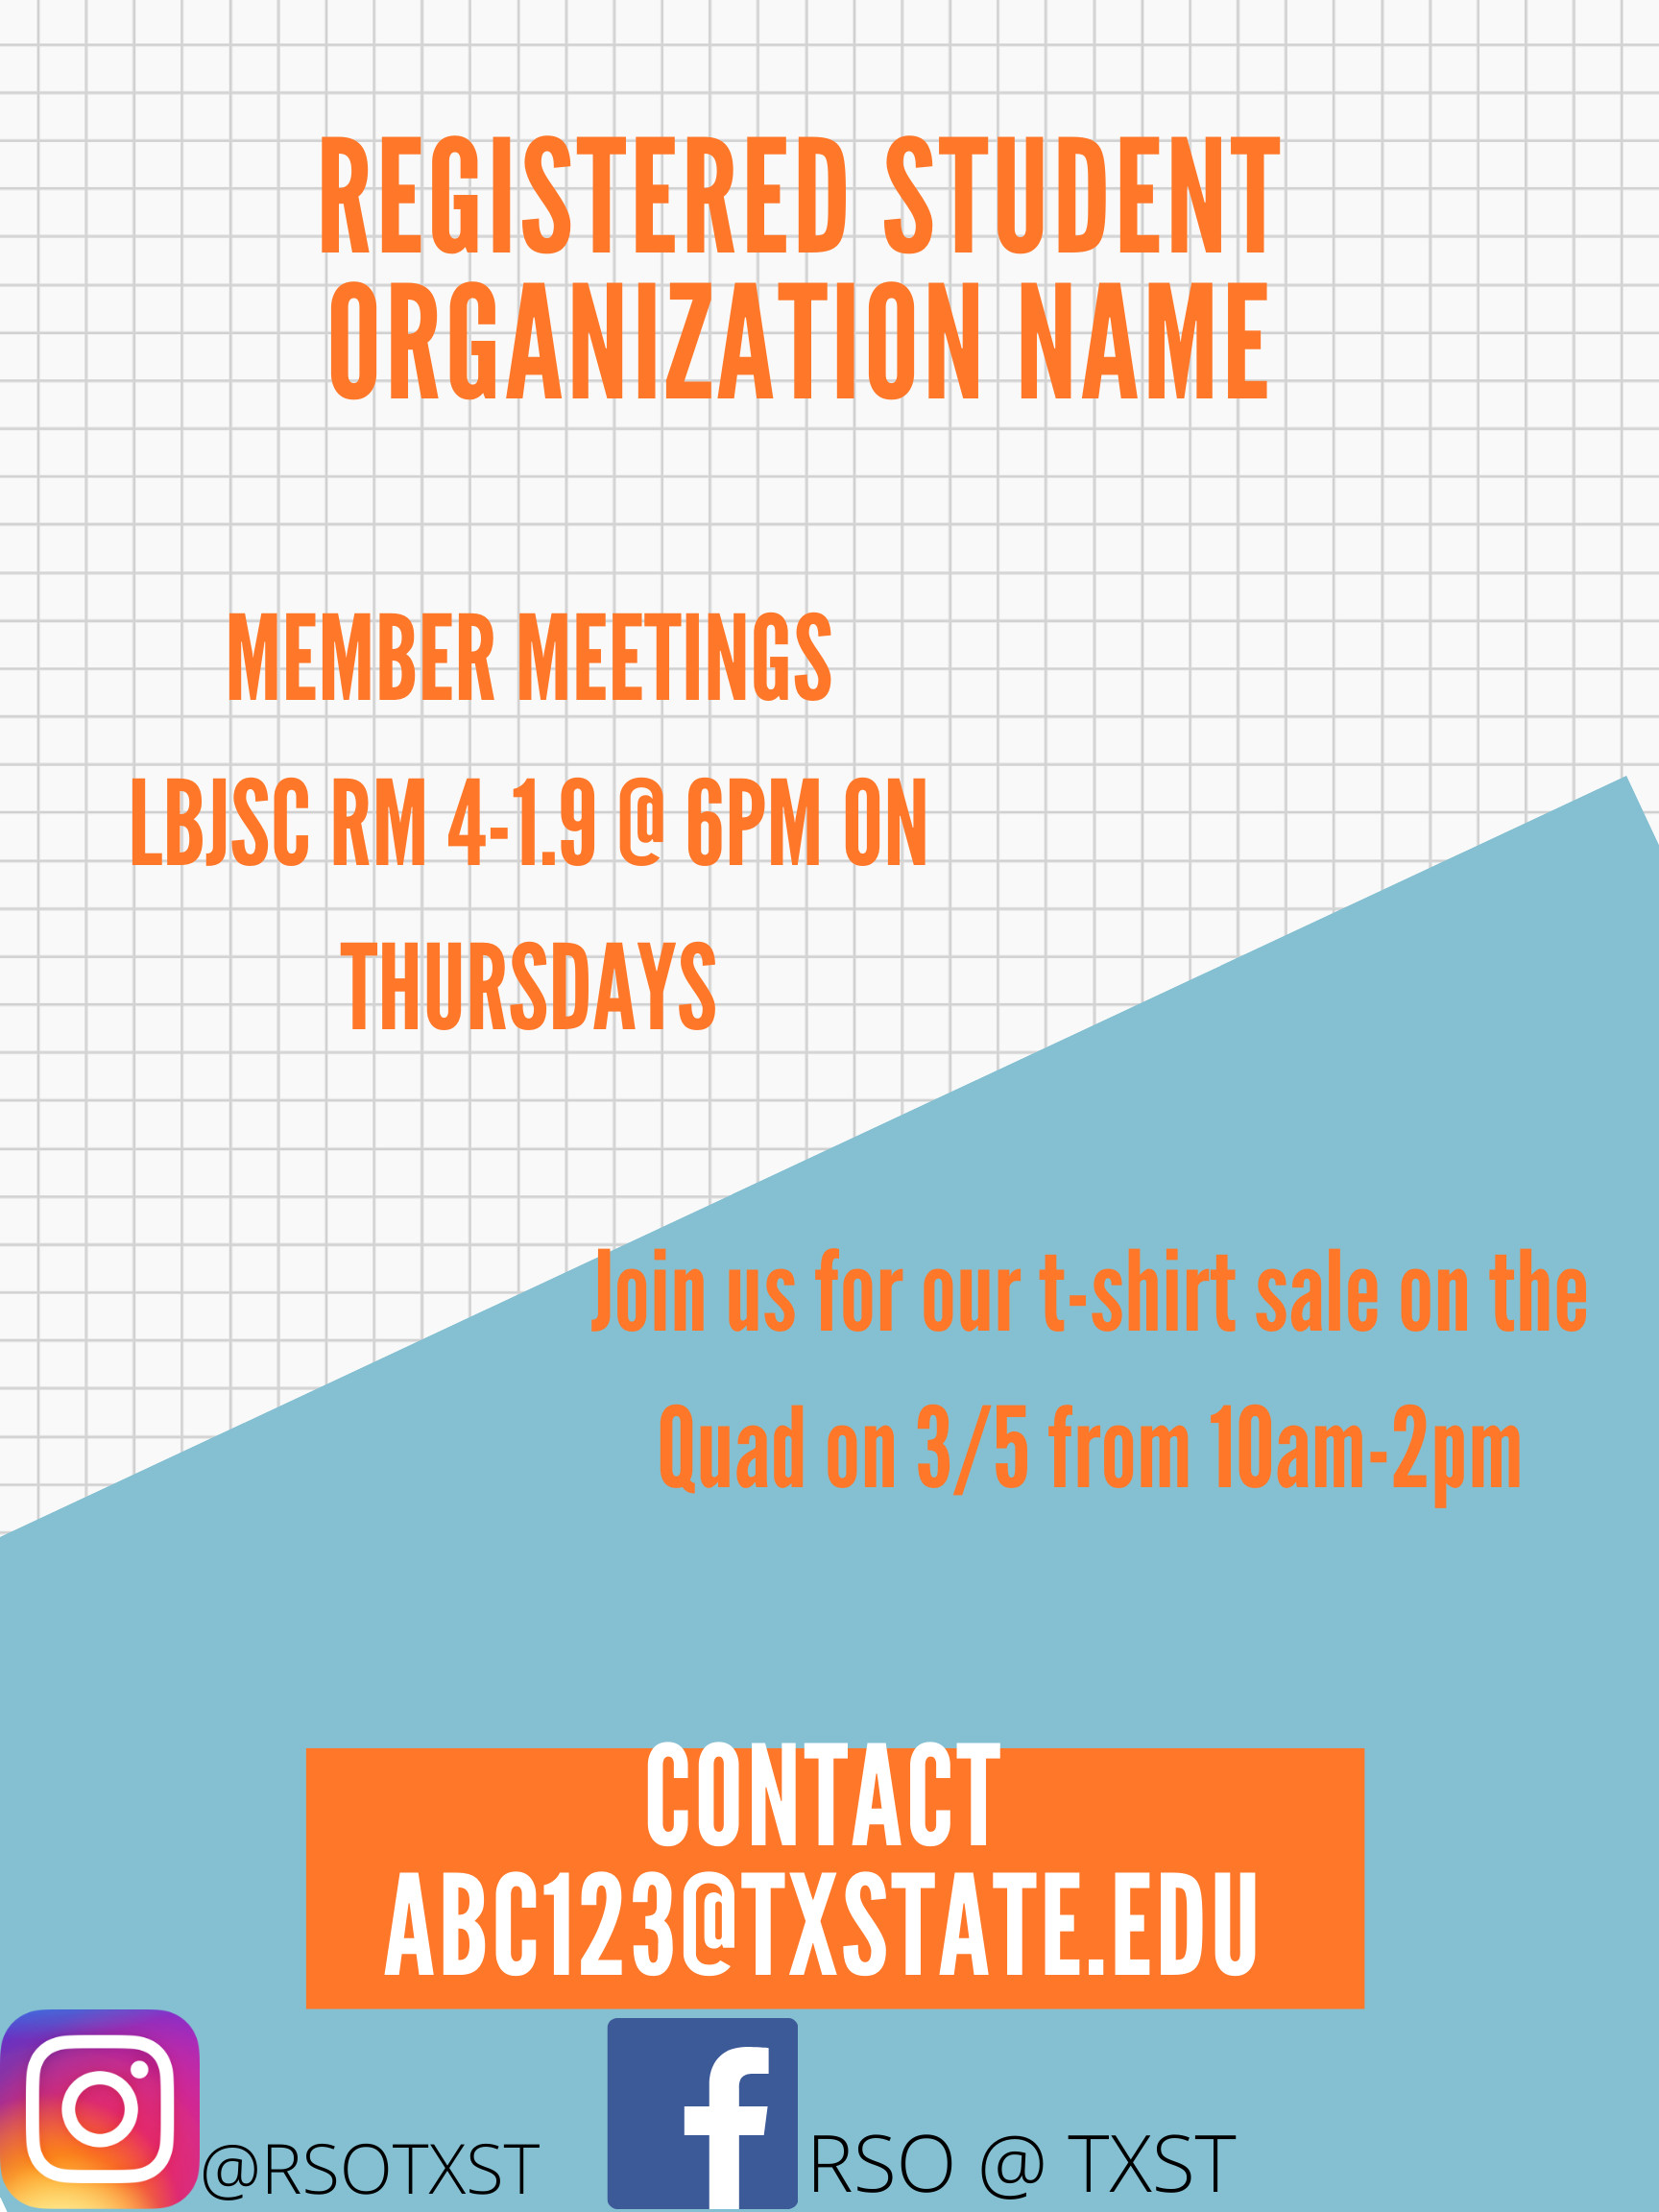 An exmaple of a registered student organization poster. It includes the org name, date and times for two events, as well as a contact email and social media handles